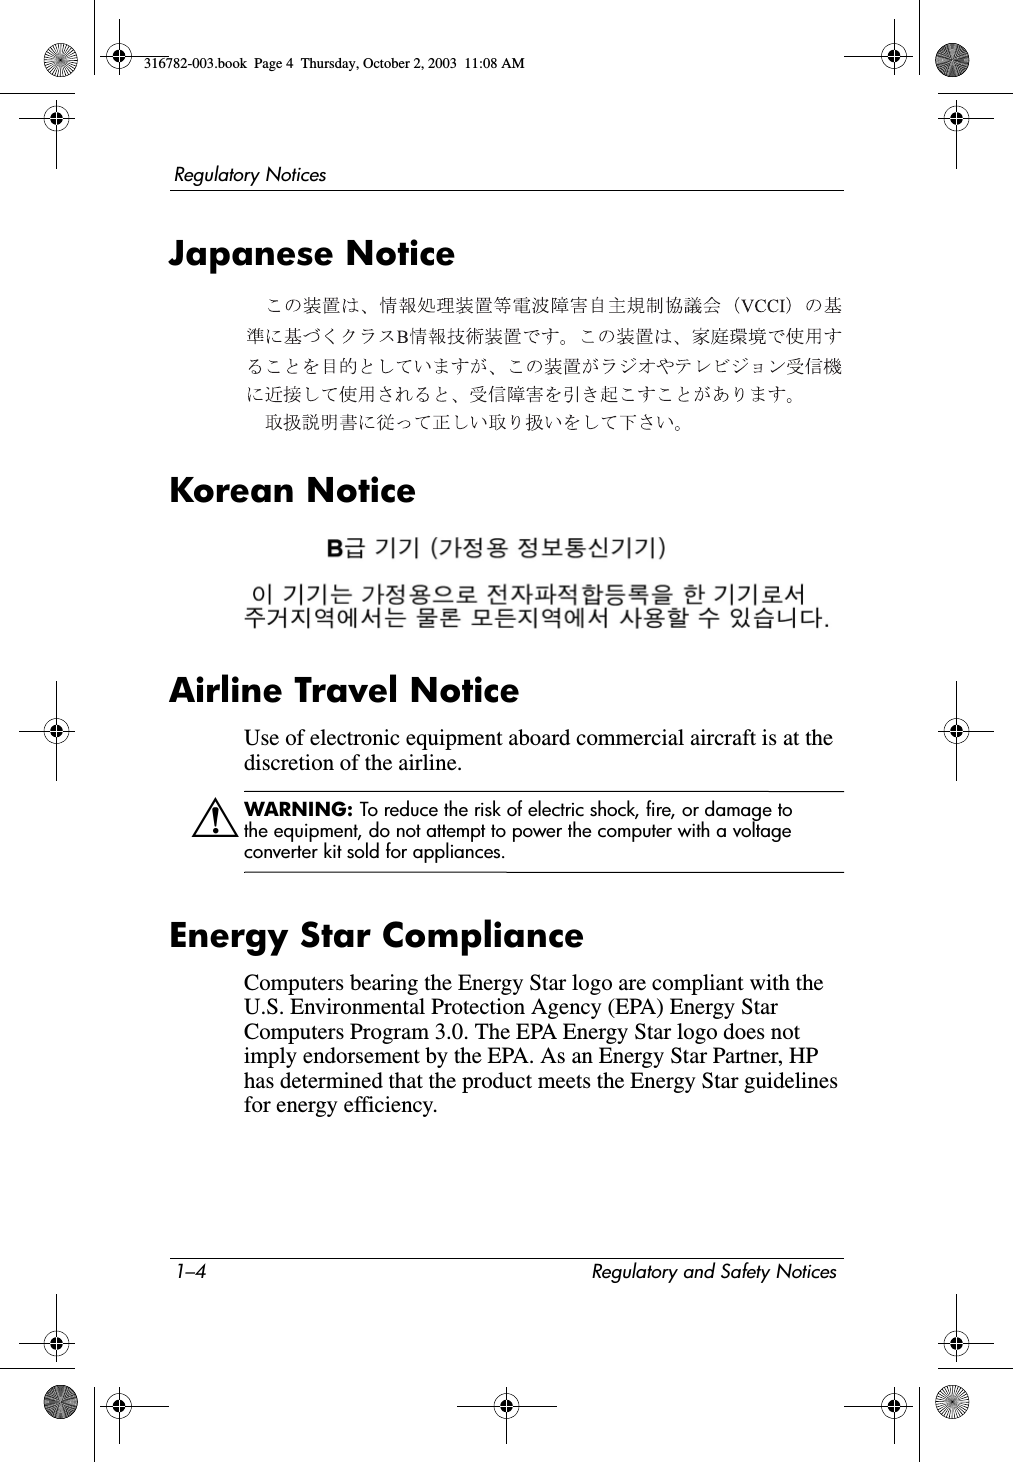 1–4 Regulatory and Safety NoticesRegulatory NoticesJapanese NoticeKorean NoticeAirline Travel NoticeUse of electronic equipment aboard commercial aircraft is at the discretion of the airline.ÅWARNING: To reduce the risk of electric shock, fire, or damage to the equipment, do not attempt to power the computer with a voltage converter kit sold for appliances.Energy Star ComplianceComputers bearing the Energy Star logo are compliant with the U.S. Environmental Protection Agency (EPA) Energy Star Computers Program 3.0. The EPA Energy Star logo does not imply endorsement by the EPA. As an Energy Star Partner, HP has determined that the product meets the Energy Star guidelines for energy efficiency.316782-003.book  Page 4  Thursday, October 2, 2003  11:08 AM